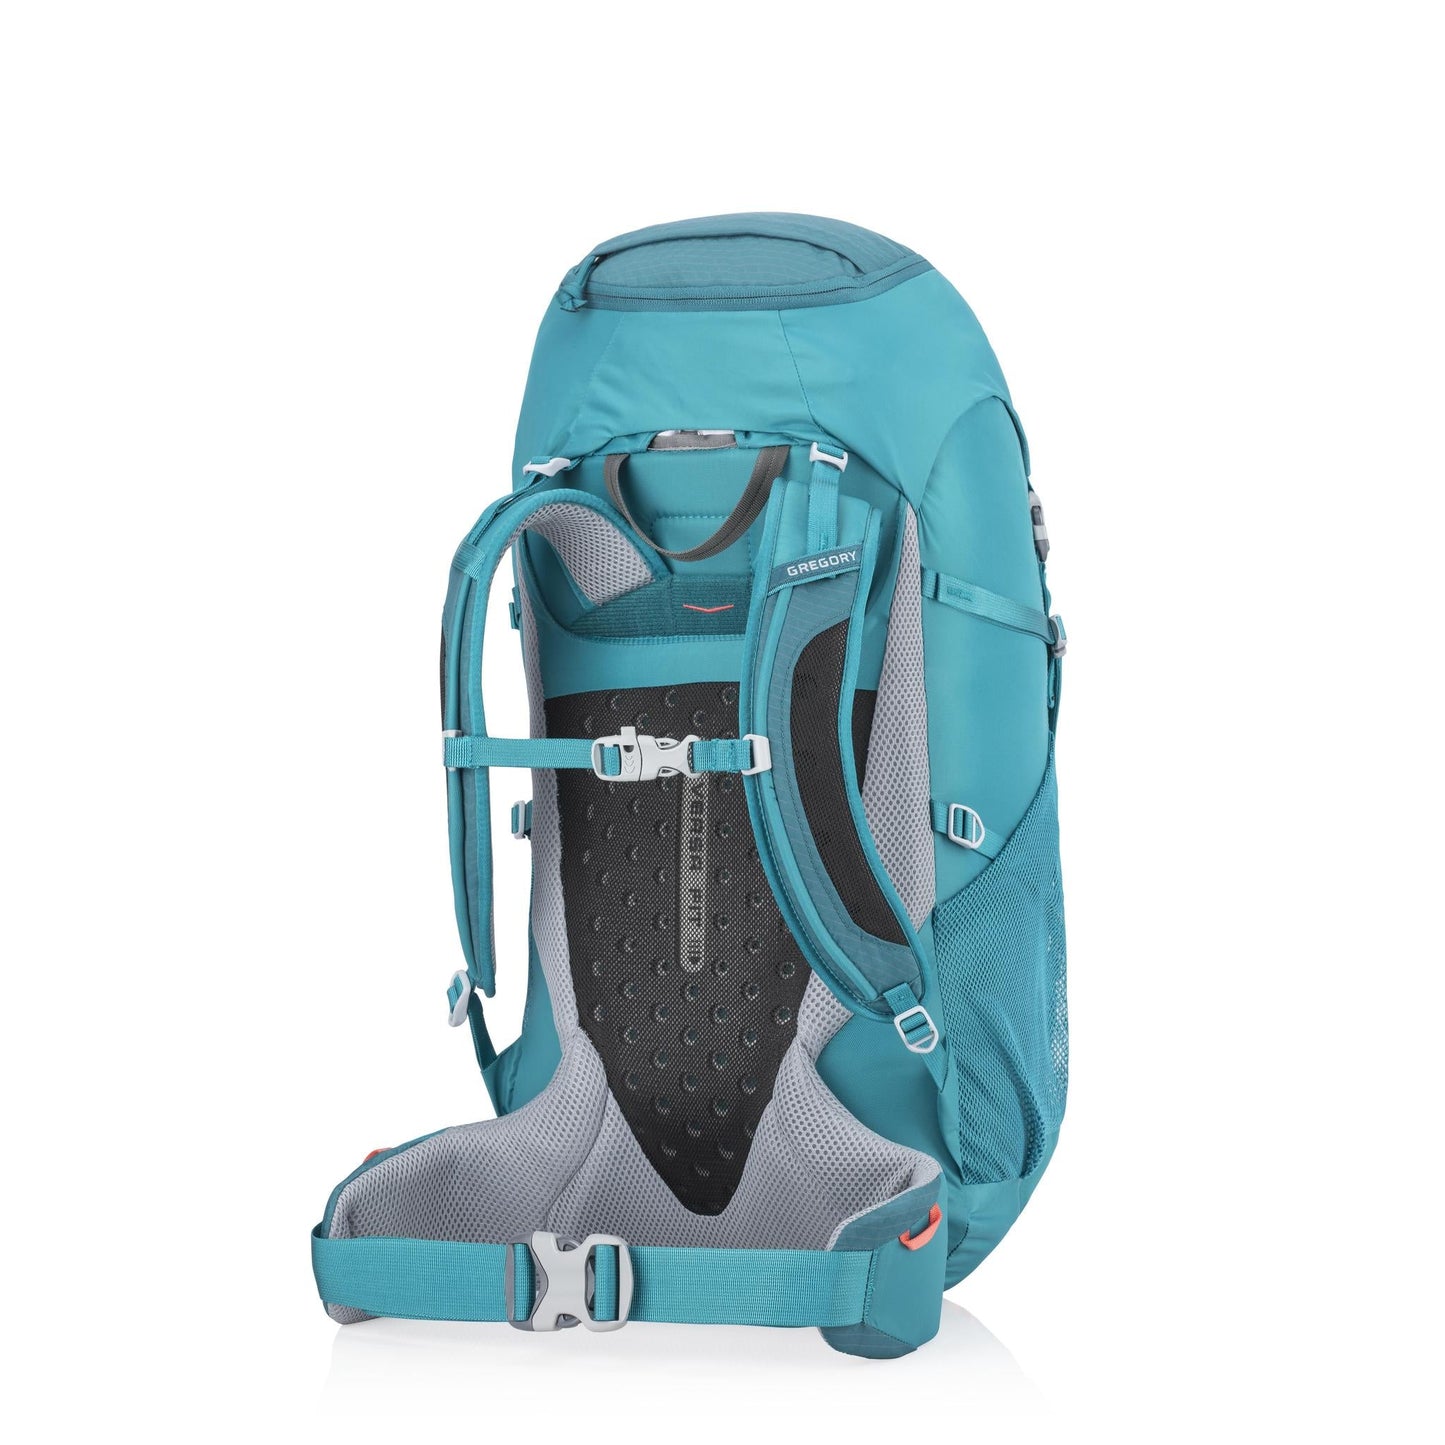 Gregory Icarus 40 Backpack